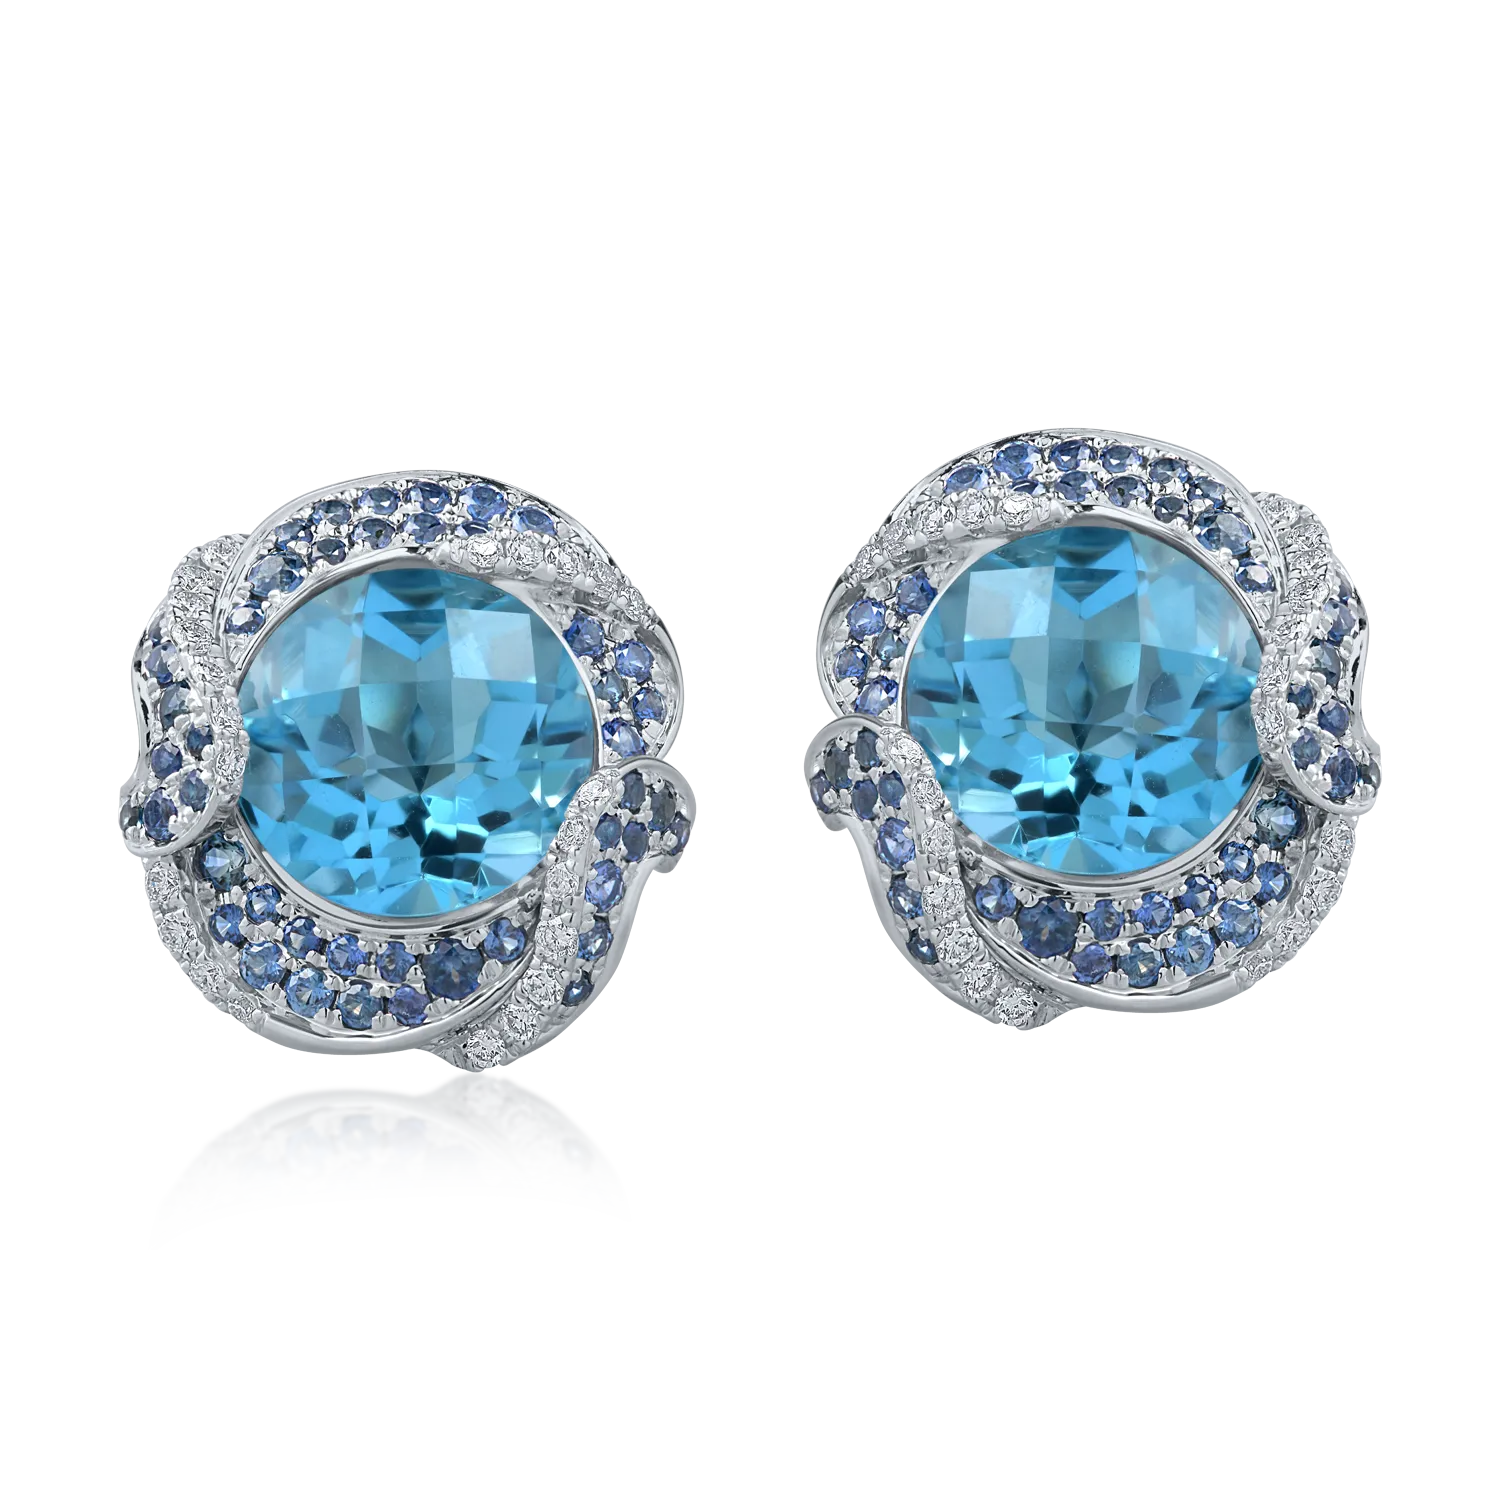 White gold earrings with 8.2ct precious and semi-precious stones